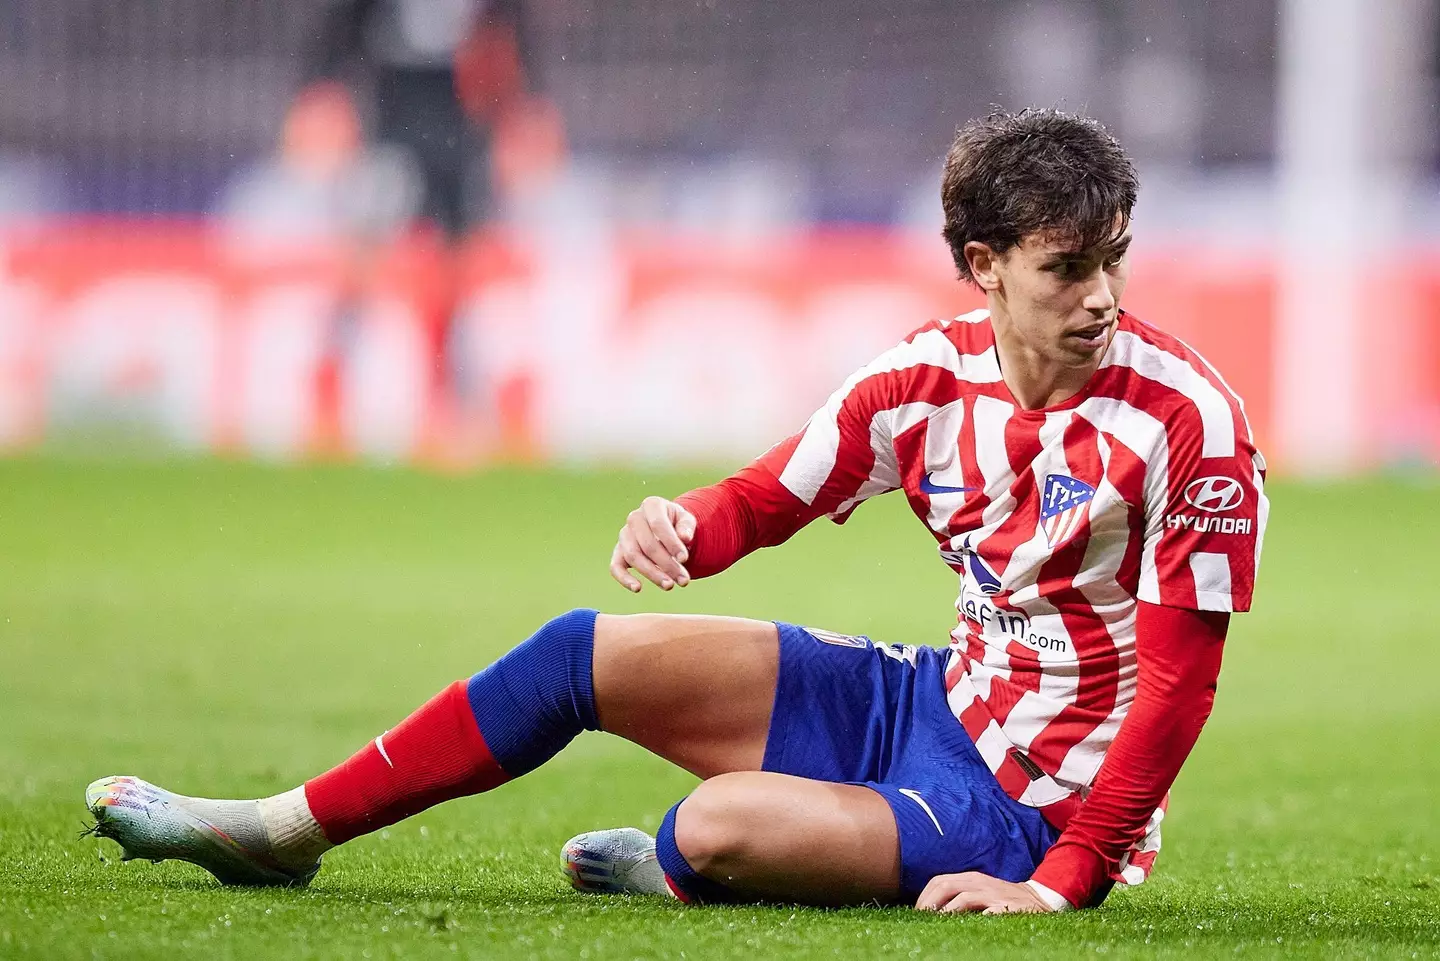 Felix during his last game as an Atletico Madrid player - a 1-0 defeat to Barcelona. (Image